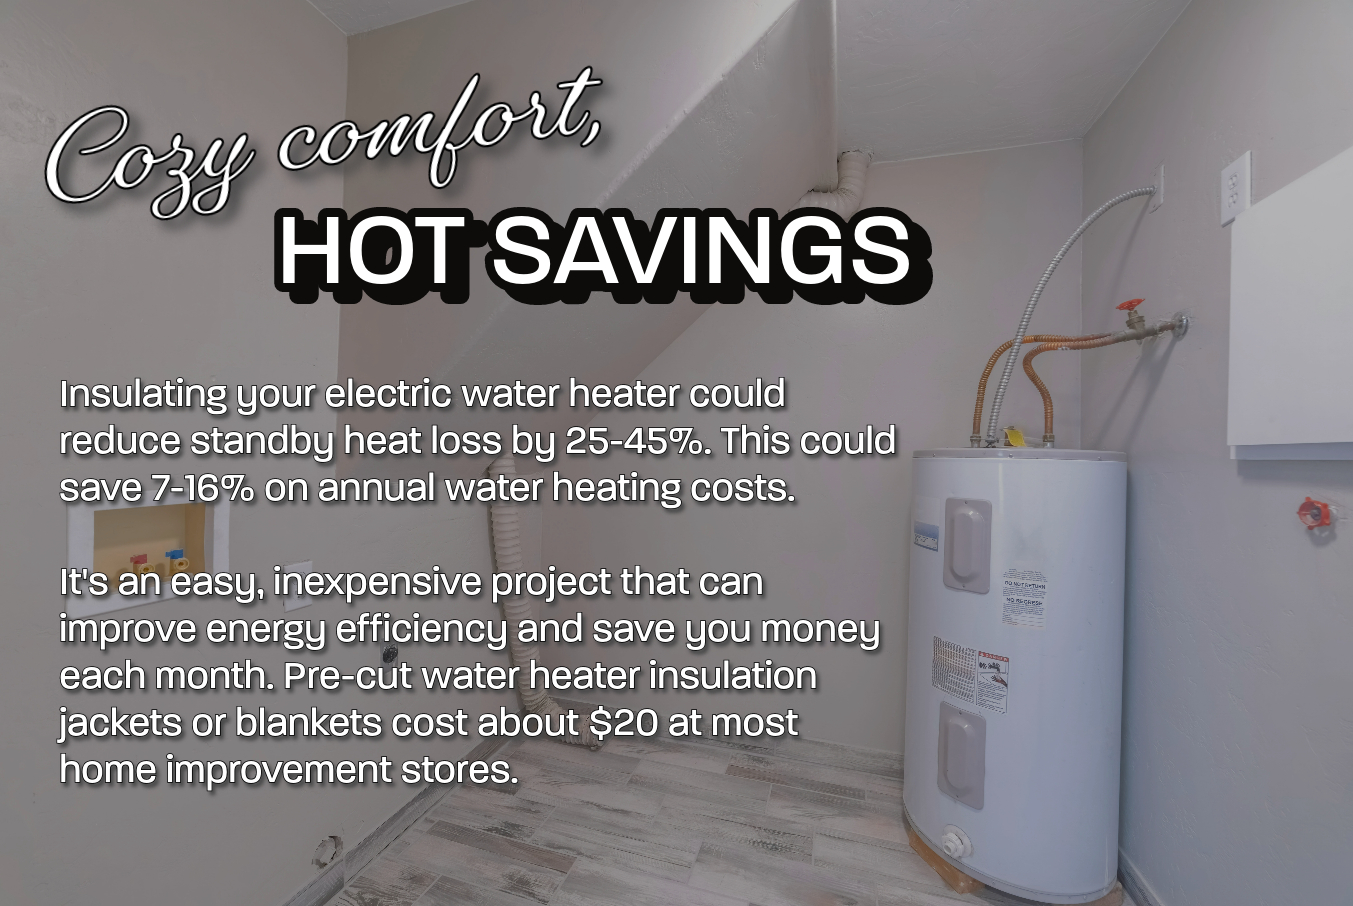 Cozy comfort, hot savings. Wrapping your water heater with an insulation blanket can help reduce your energy costs.